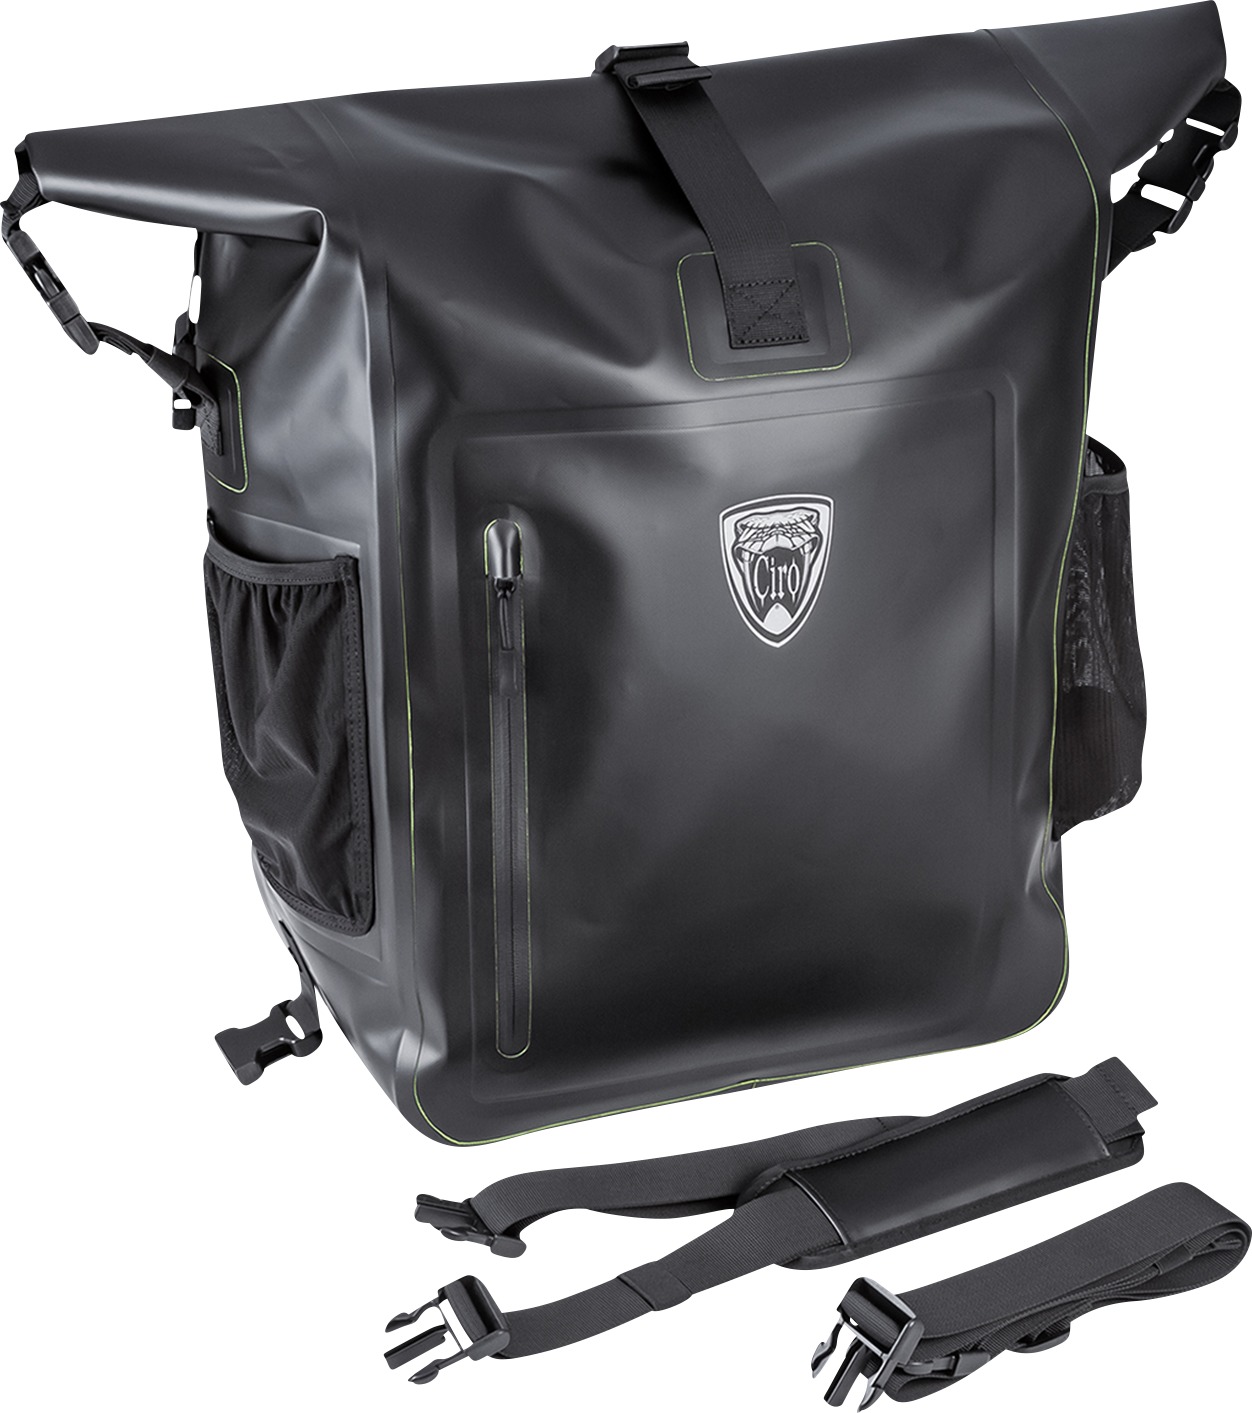 Dryforce Waterproof Roll Top Bag 60L - Click Image to Close